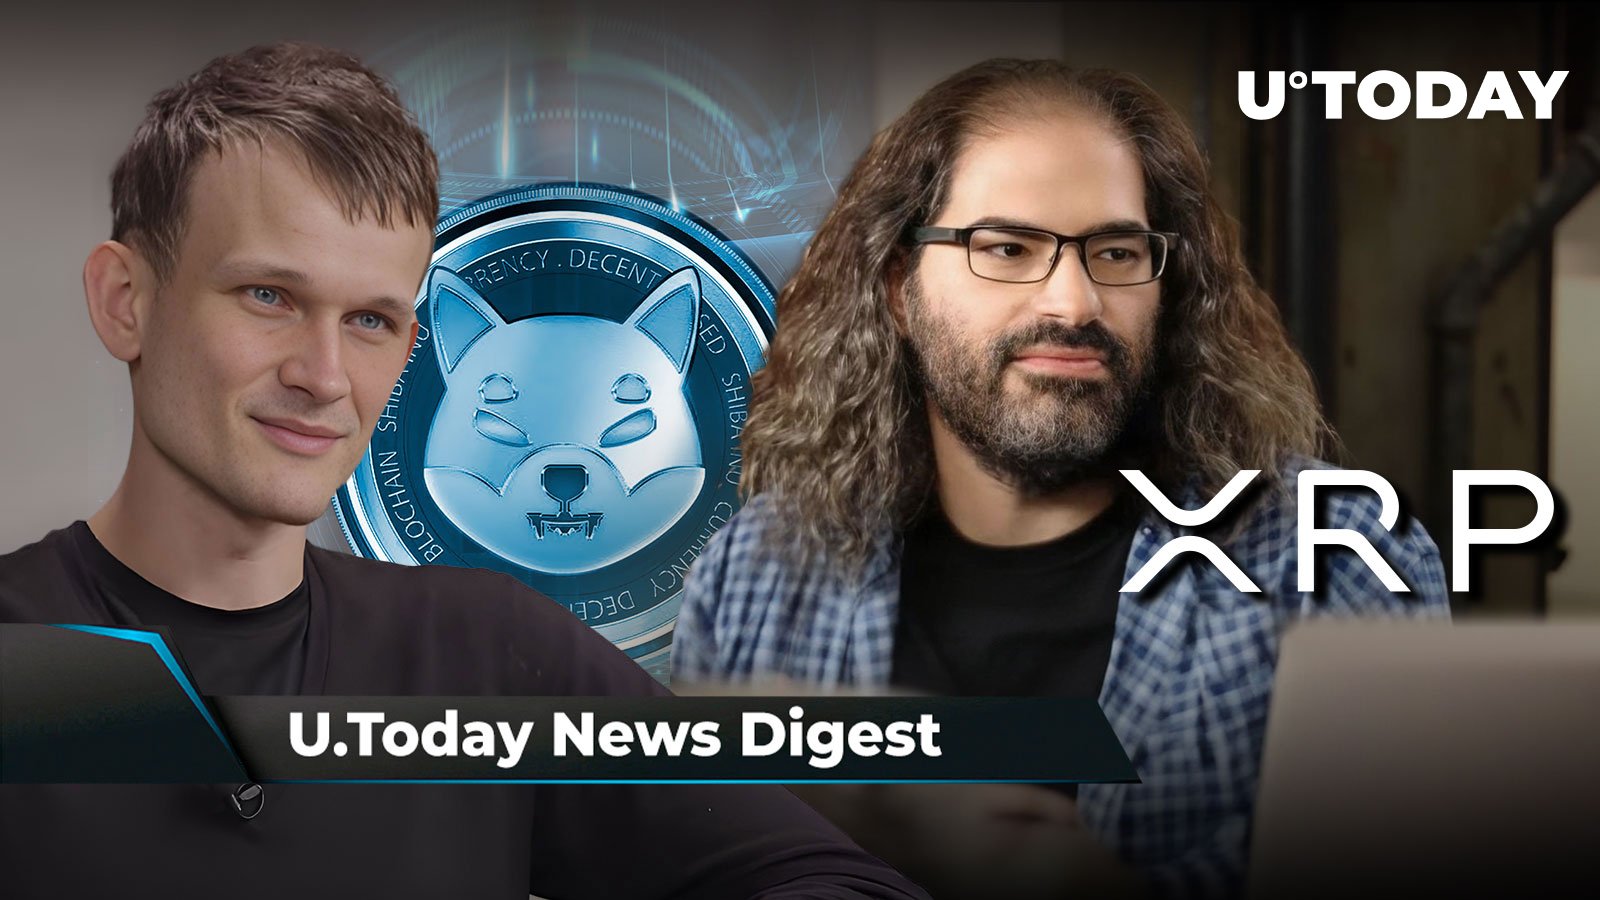 Vitalik Buterin Makes Unexpected SHIB Post, Shiba Inu Lead Kusama Replies; Ripple CTO Says It’s ‘Nearly Impossible’ to Avoid Selling XRP: Crypto News Digest by U.Today